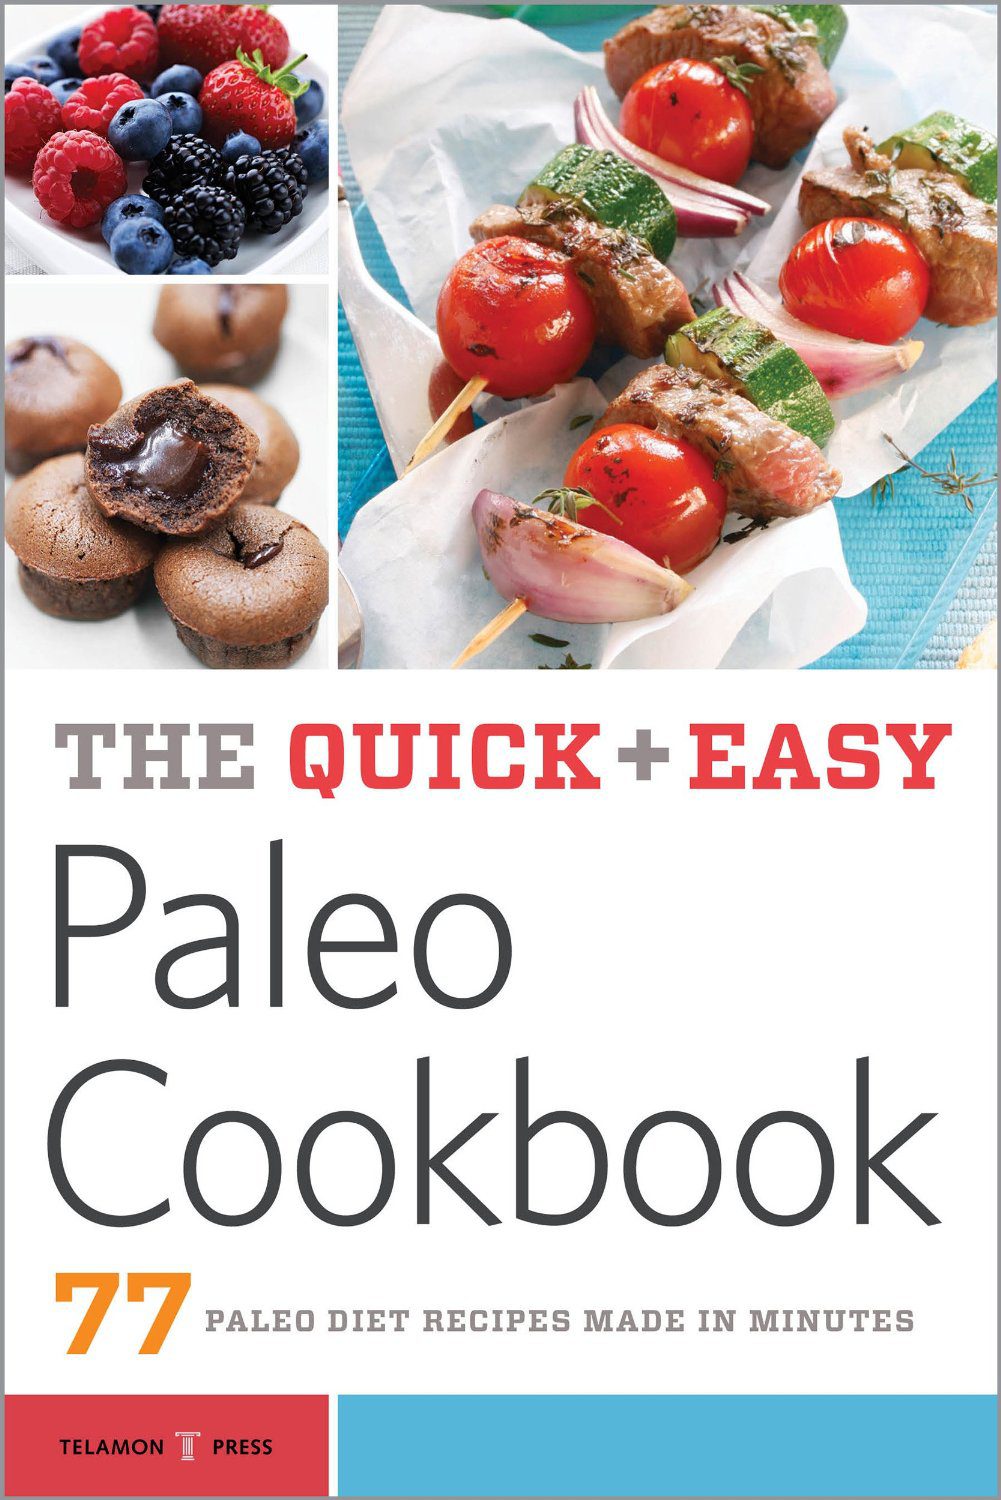 The Quick and Easy Paleo Cookbook